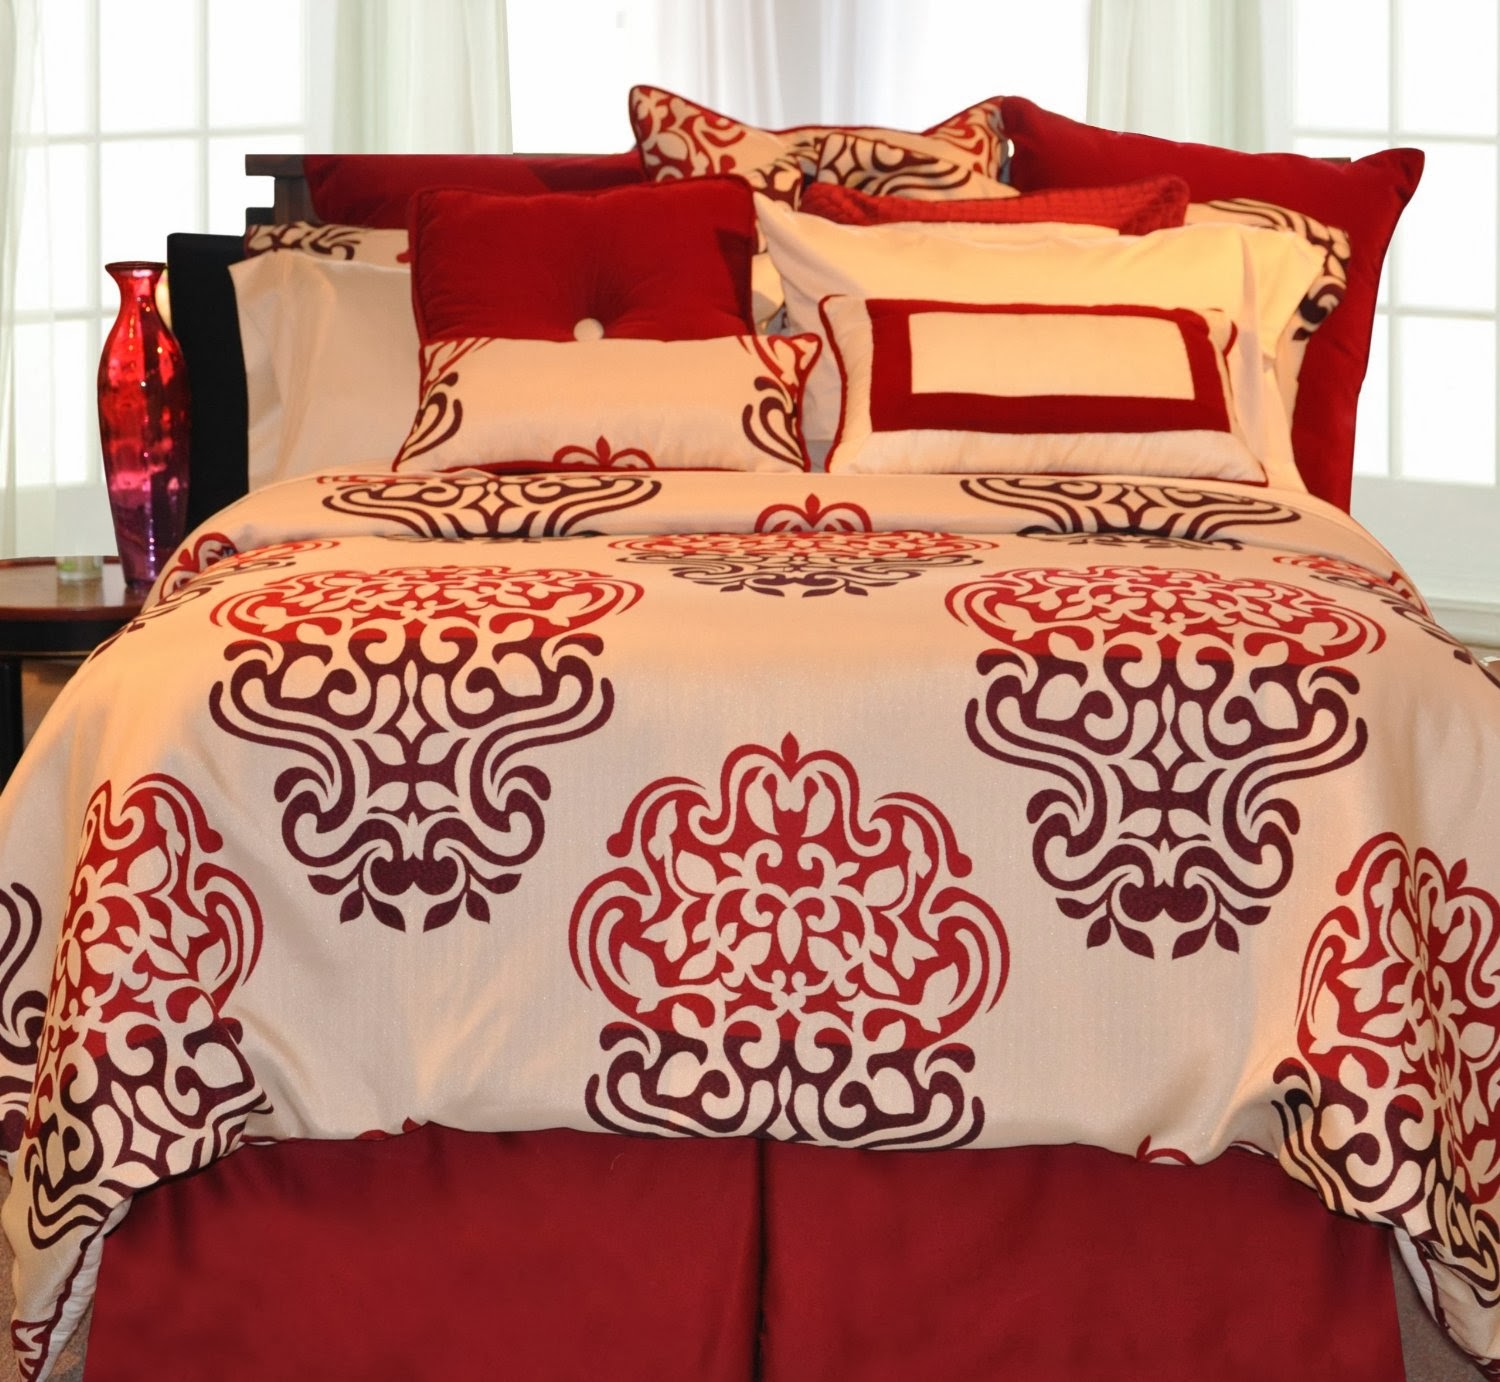 Red and Beige Cream Bedding – Ease Bedding with Style